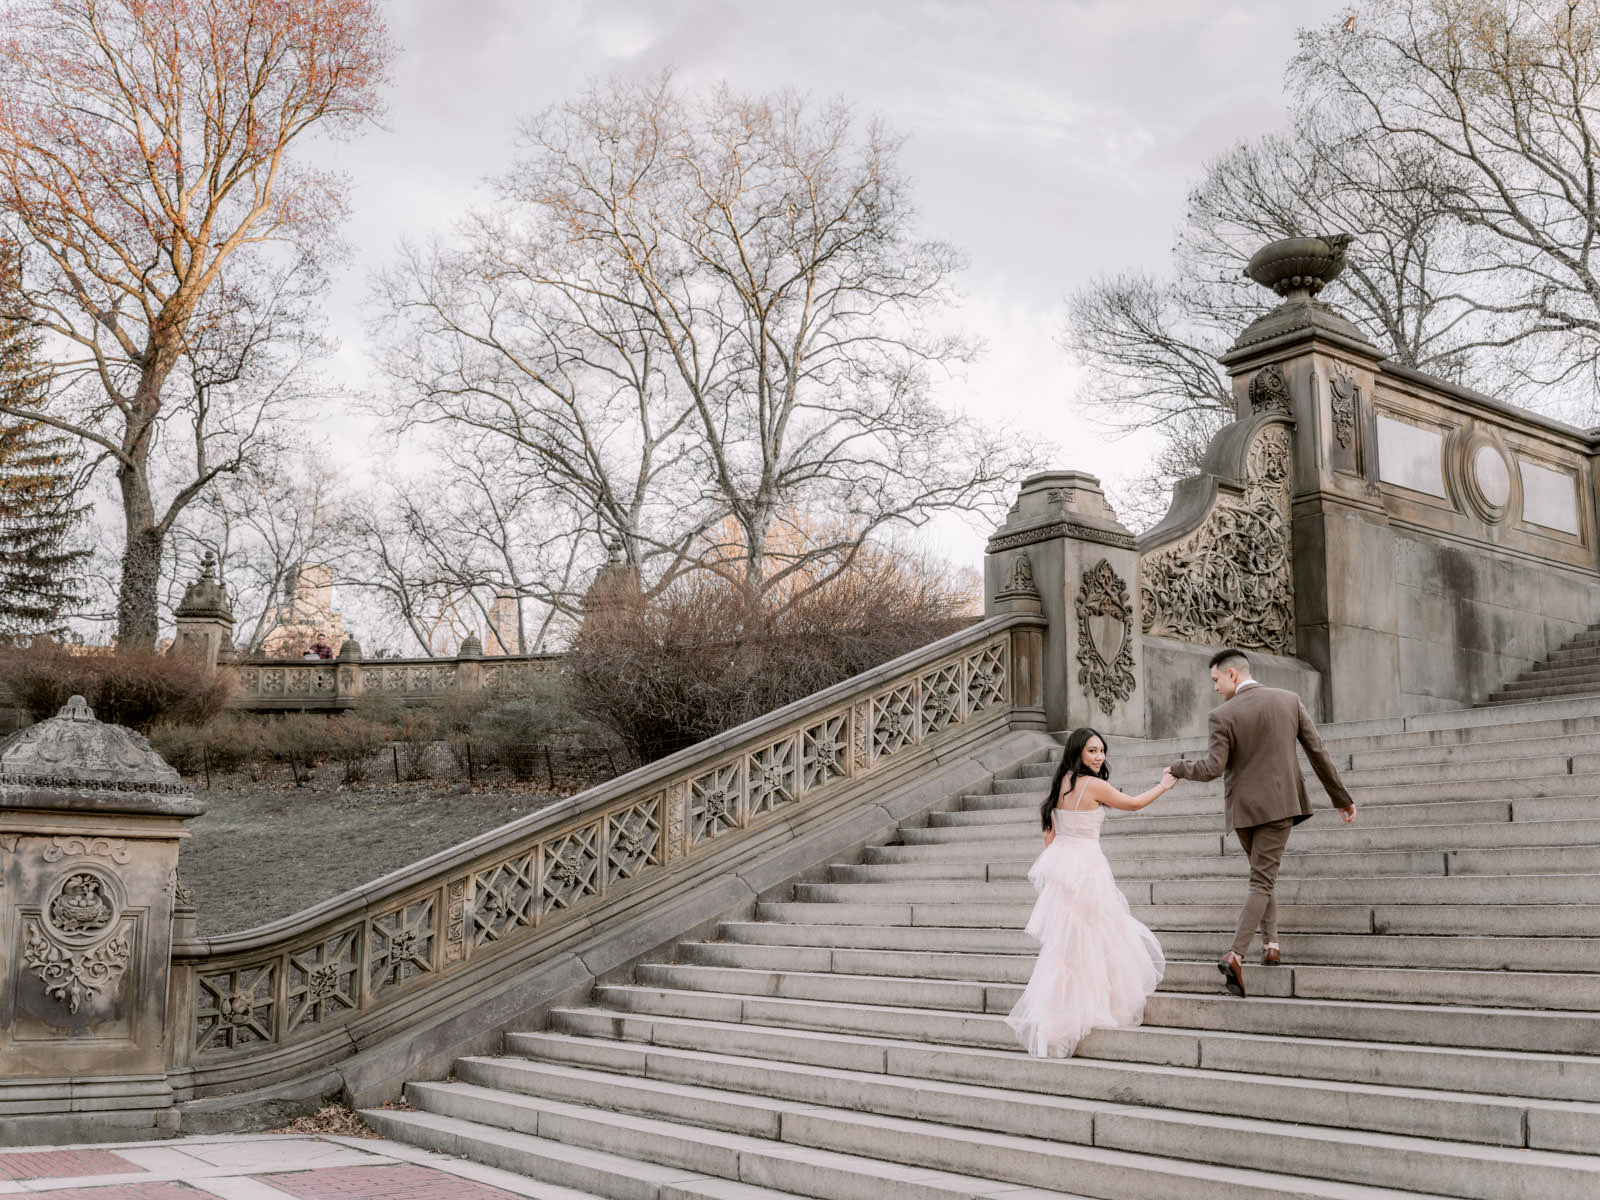 The engaged couple are climbing up a staircase at Central Park, New York City. Bridgerton inspired Editorial engagement session by Jenny Fu Studio